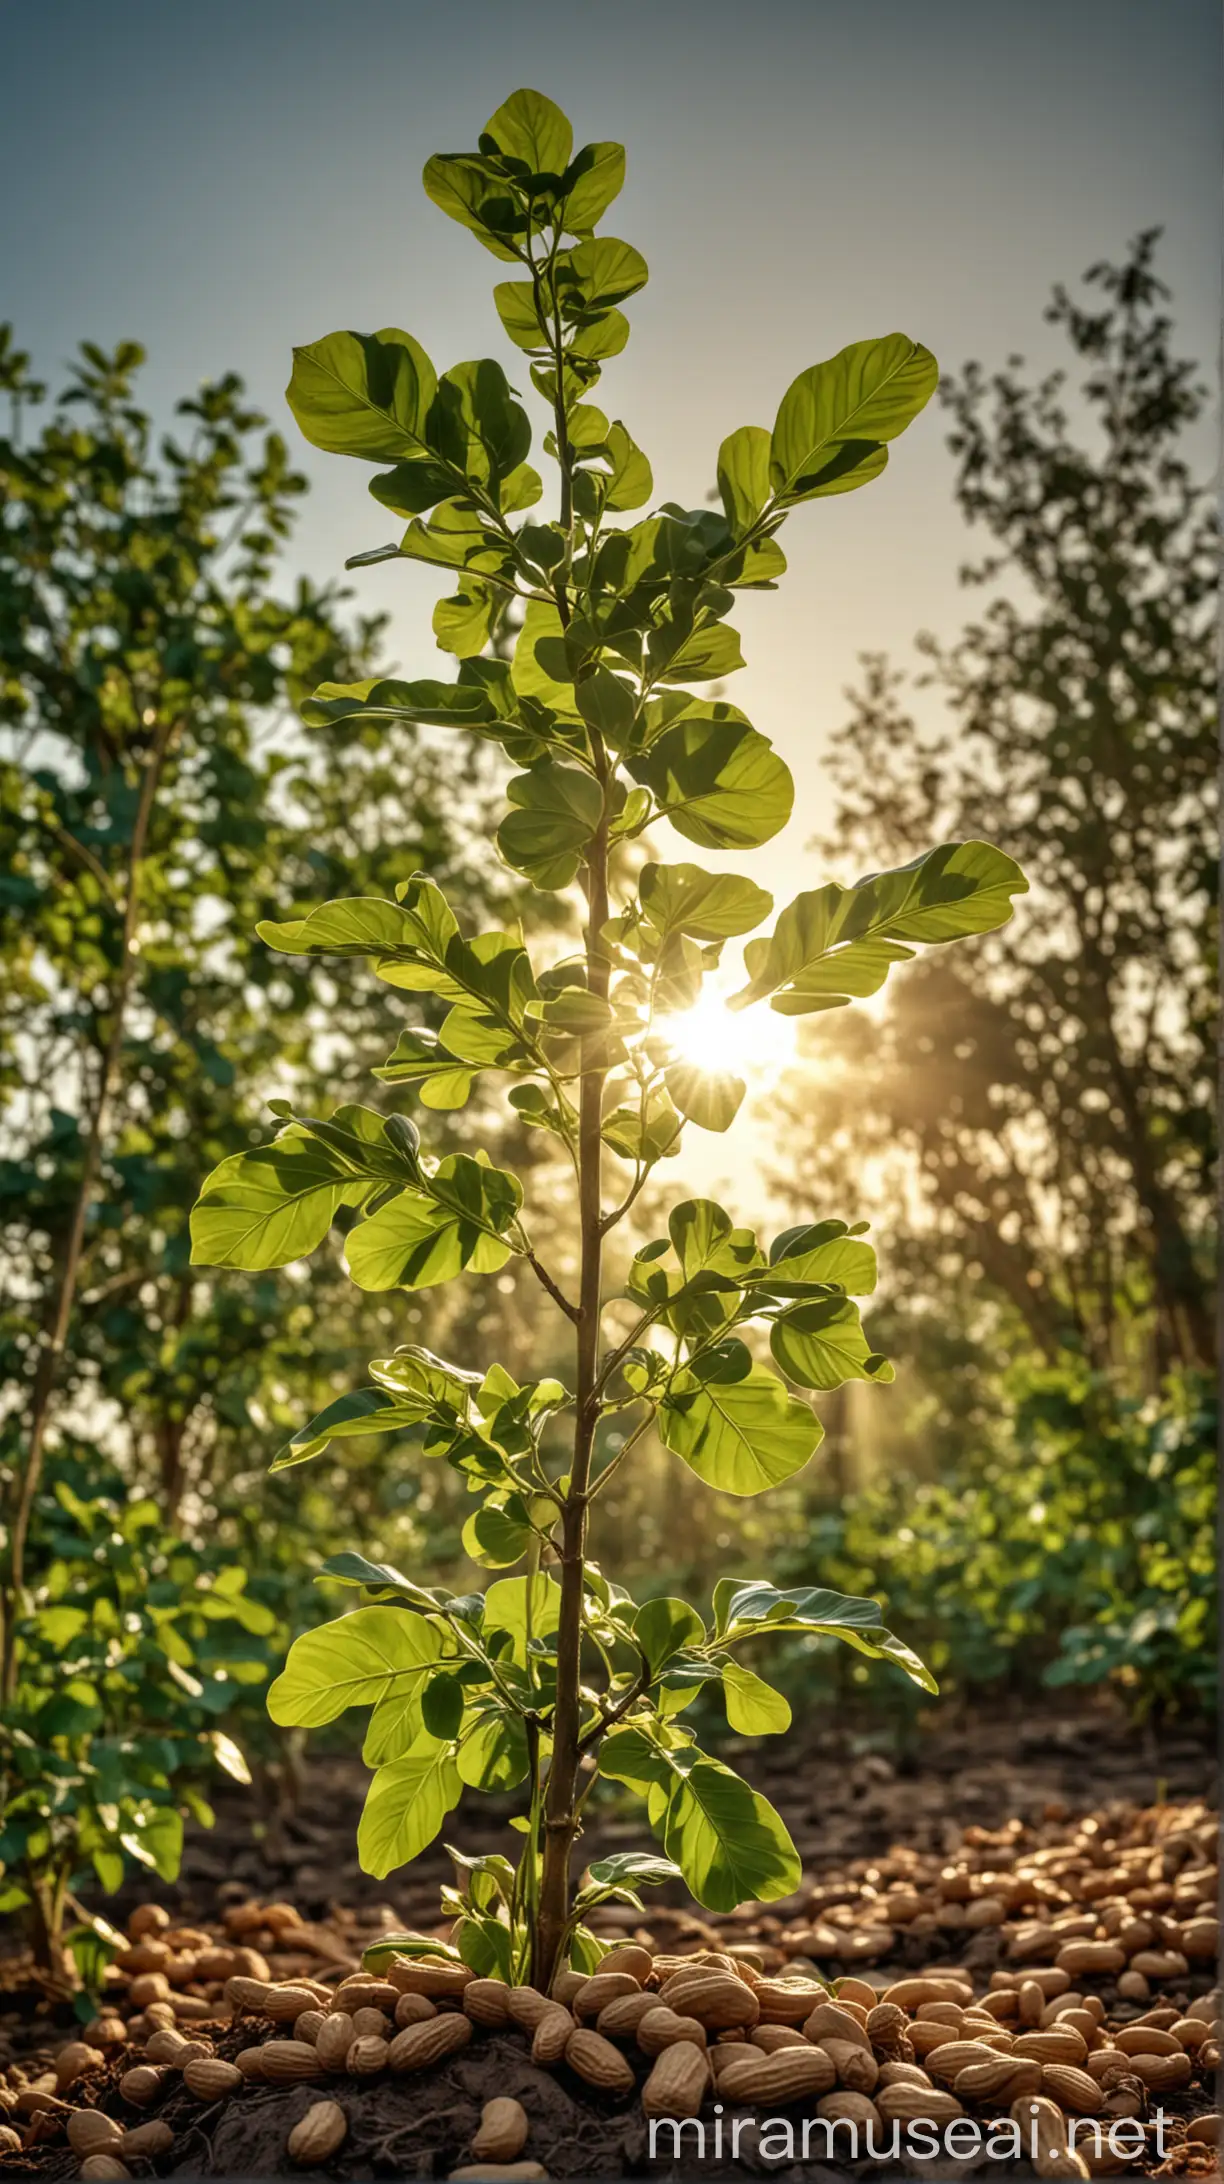 Peanut Plant Growing in Radiant Morning Sunlight Natural 4K HDR Background